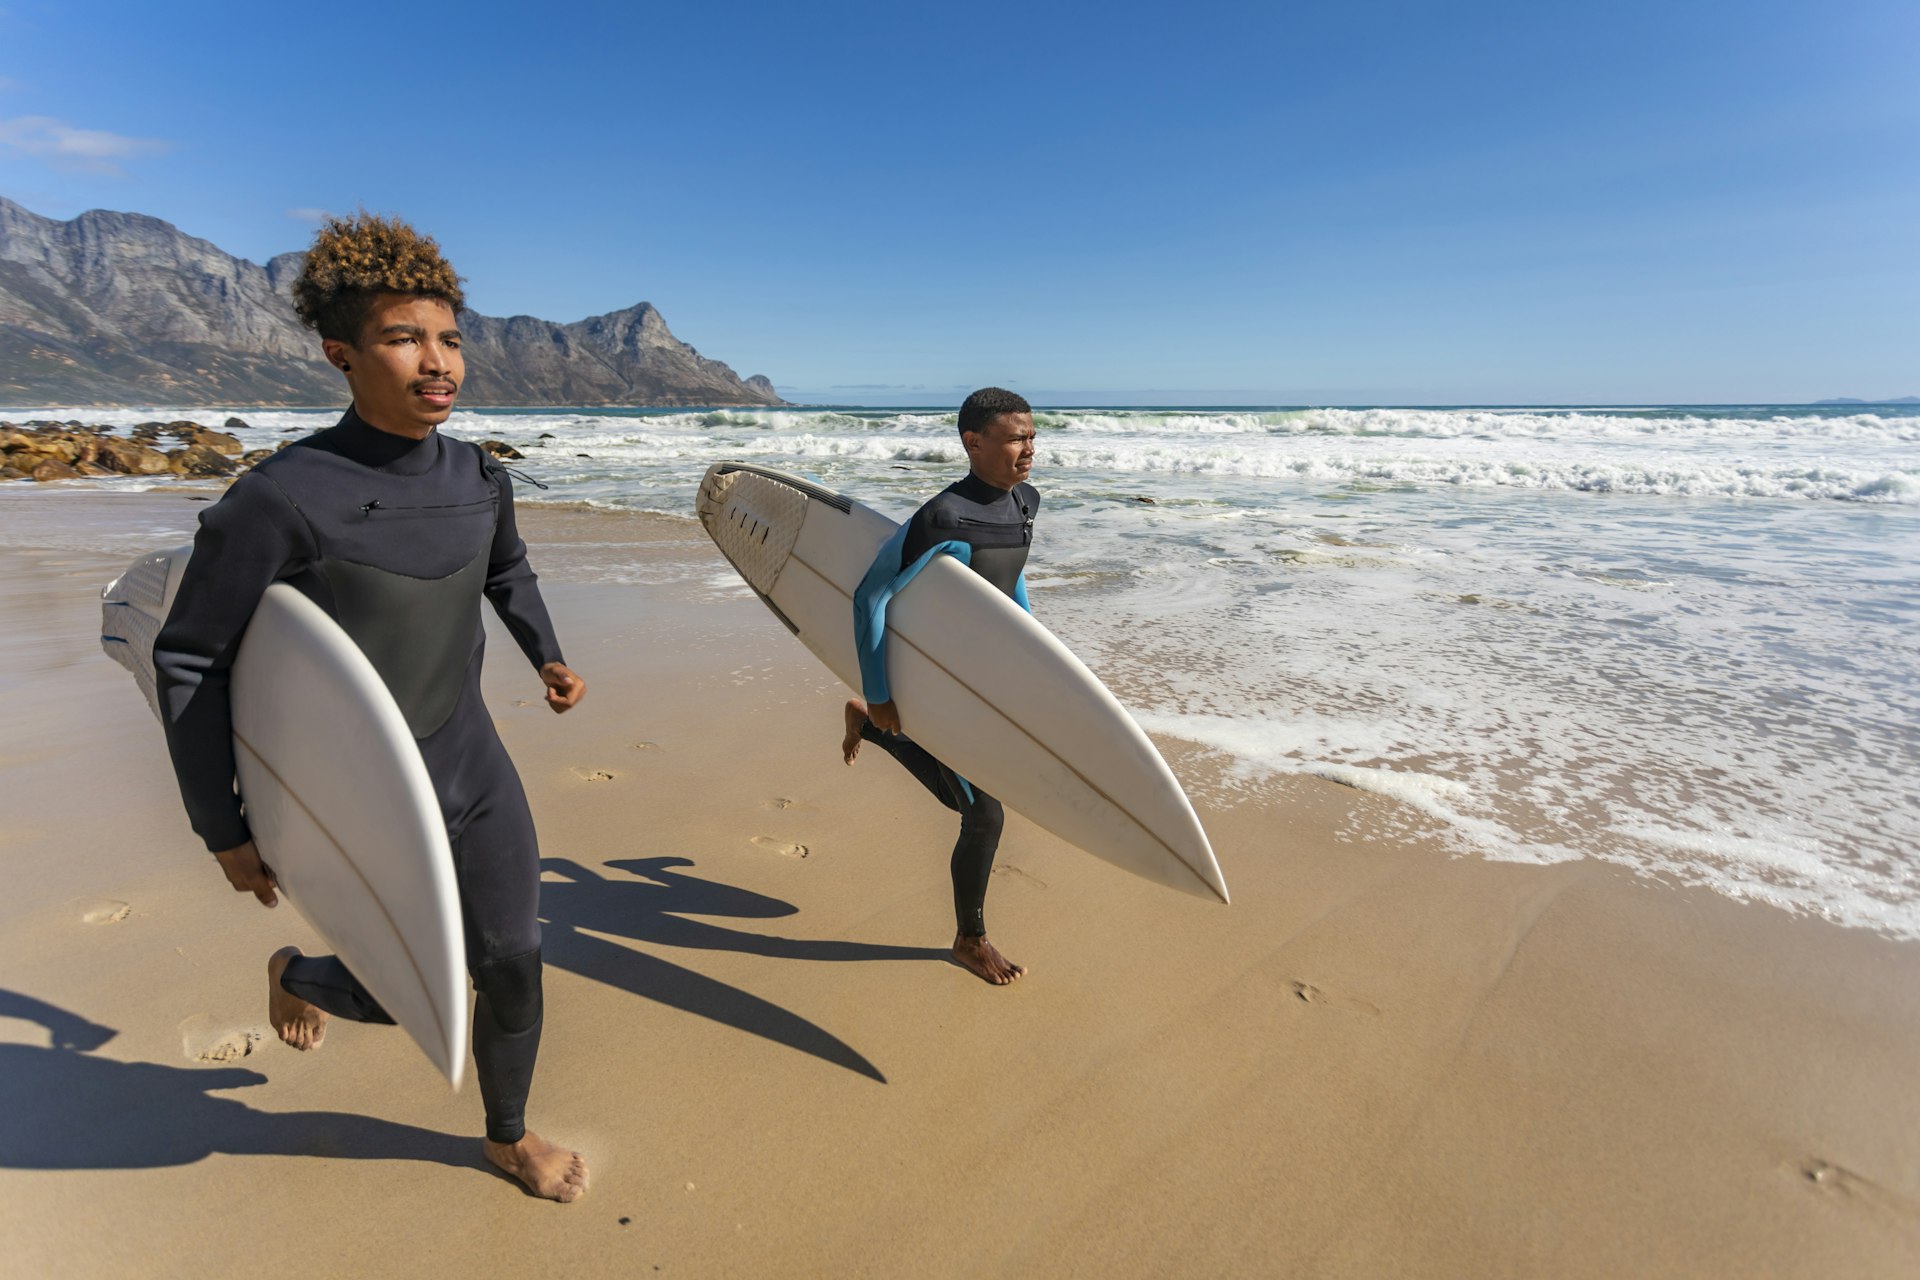 Two Black teenagers on the beach in South Africa, walking toward the water holding surfboards and carrying wetsuits